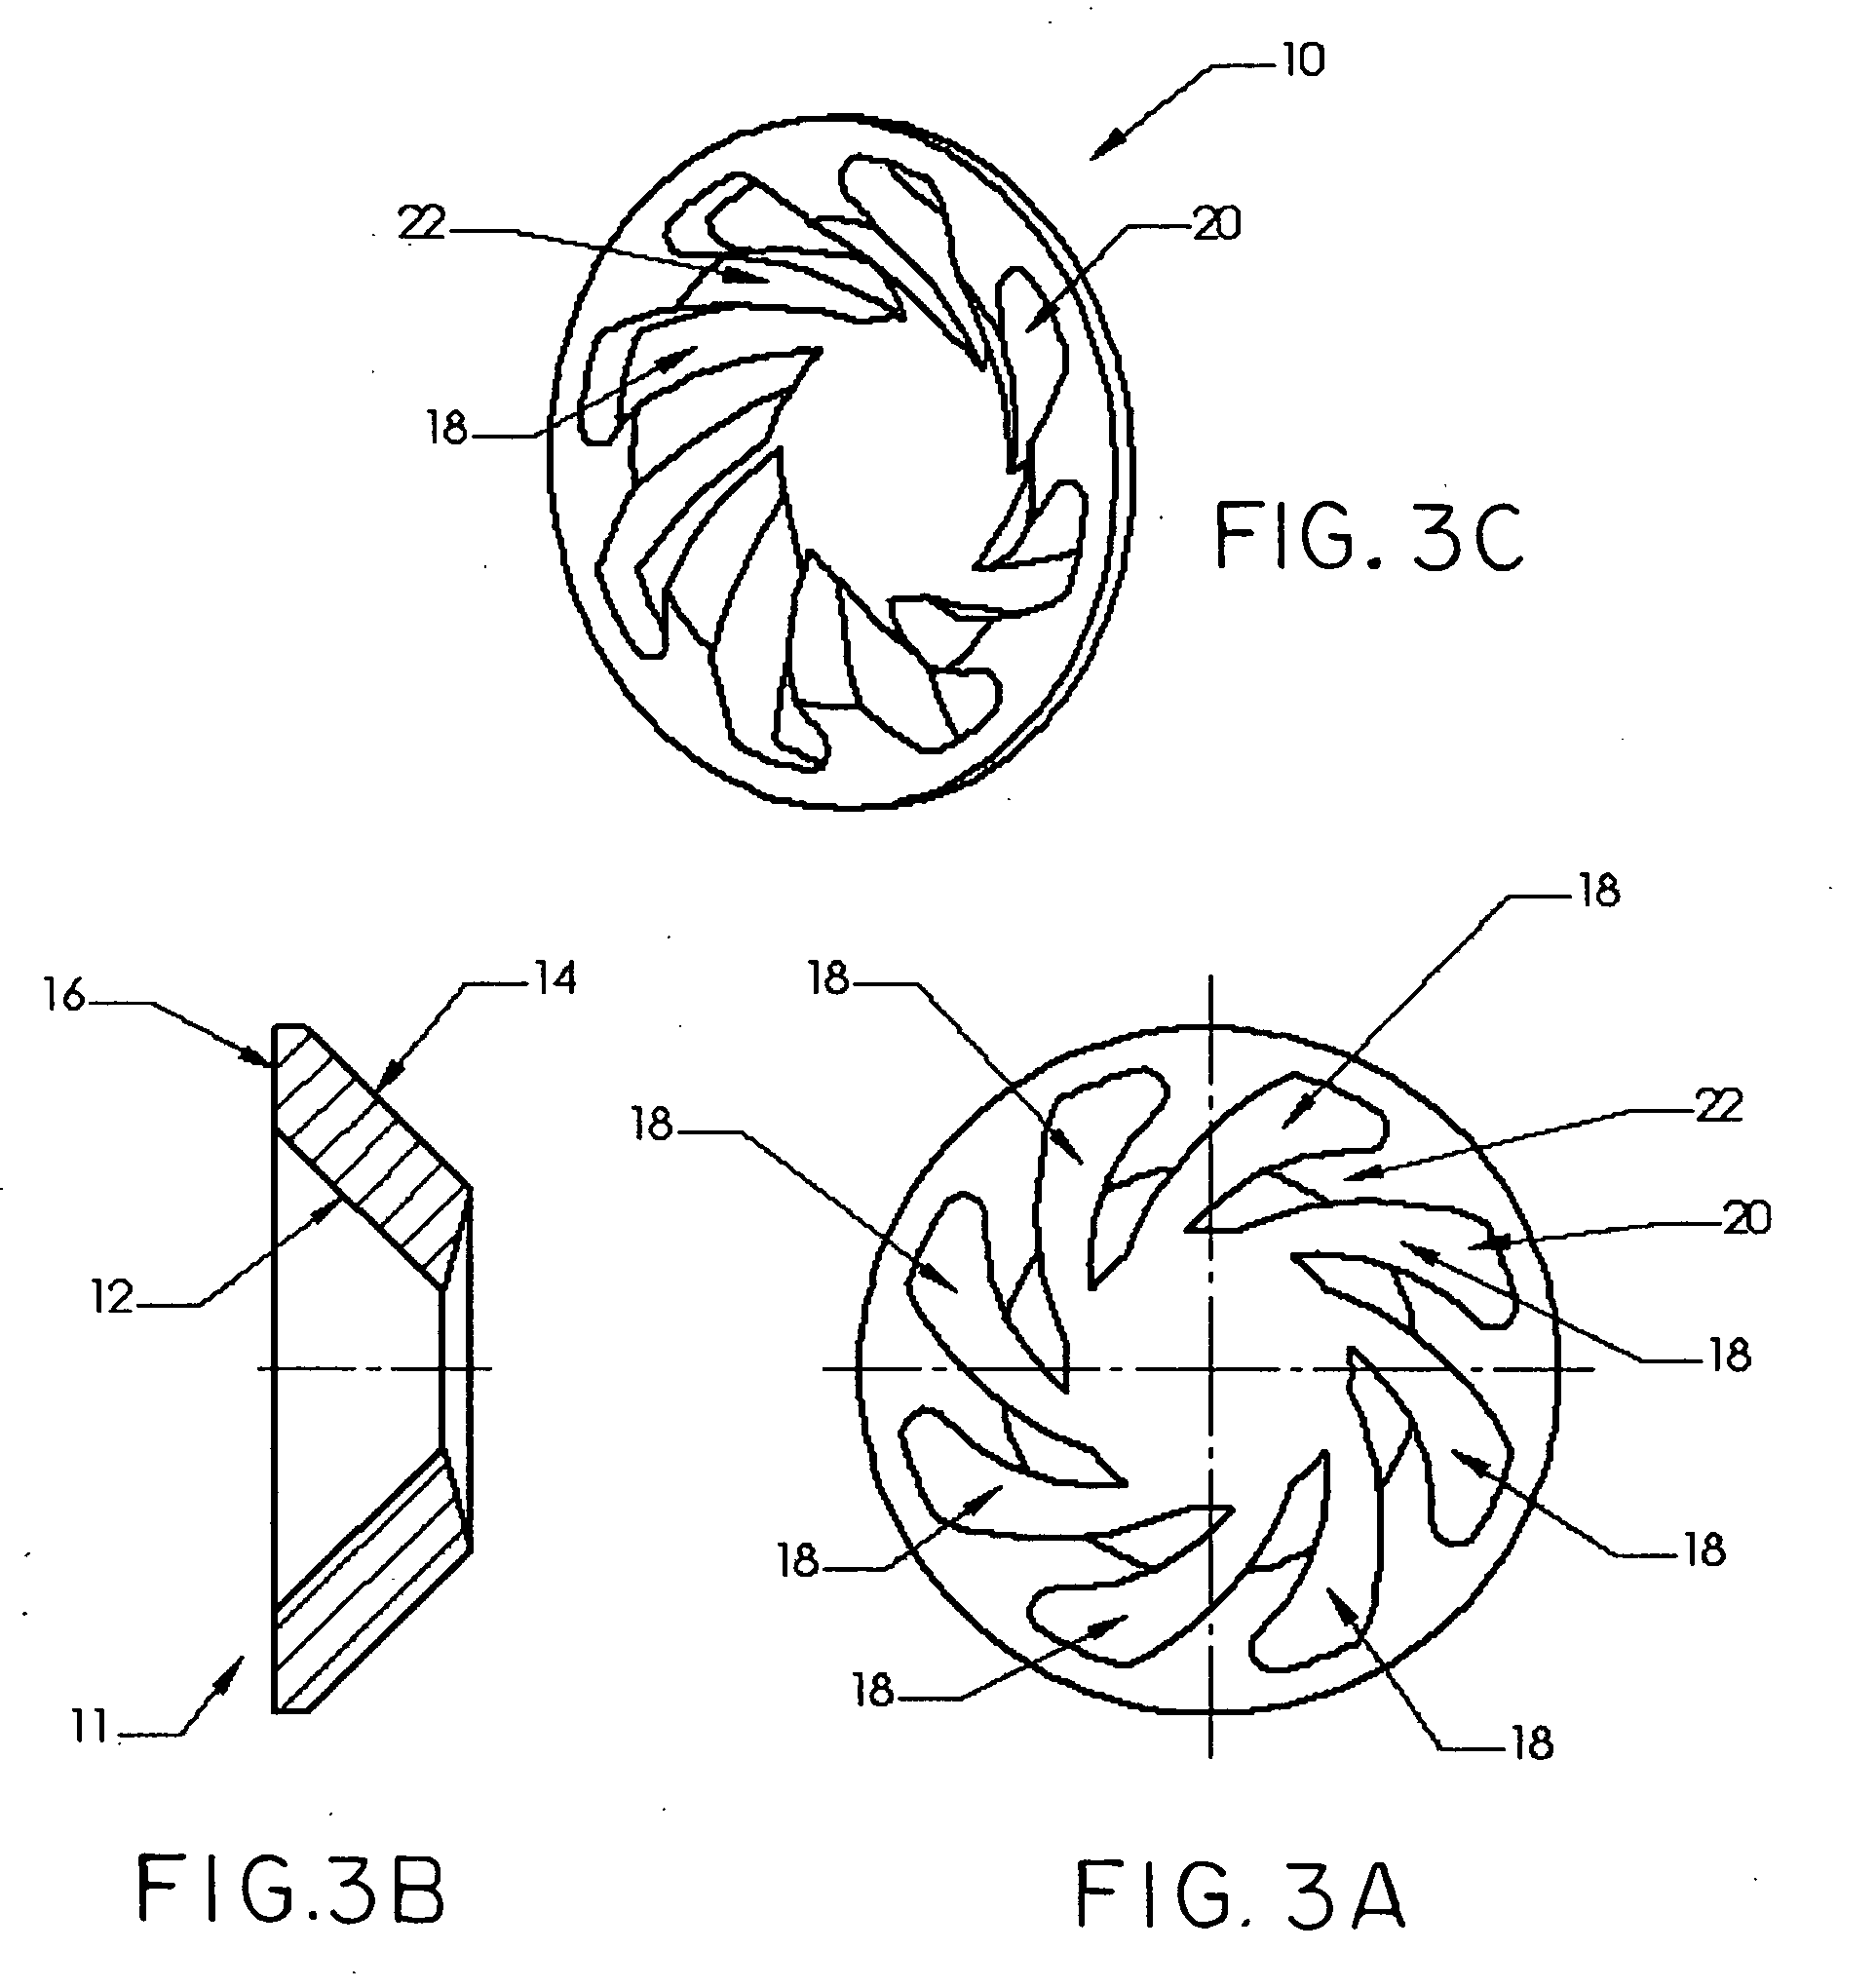 Conical swirler for fuel injectors and combustor domes and methods of manufacturing the same